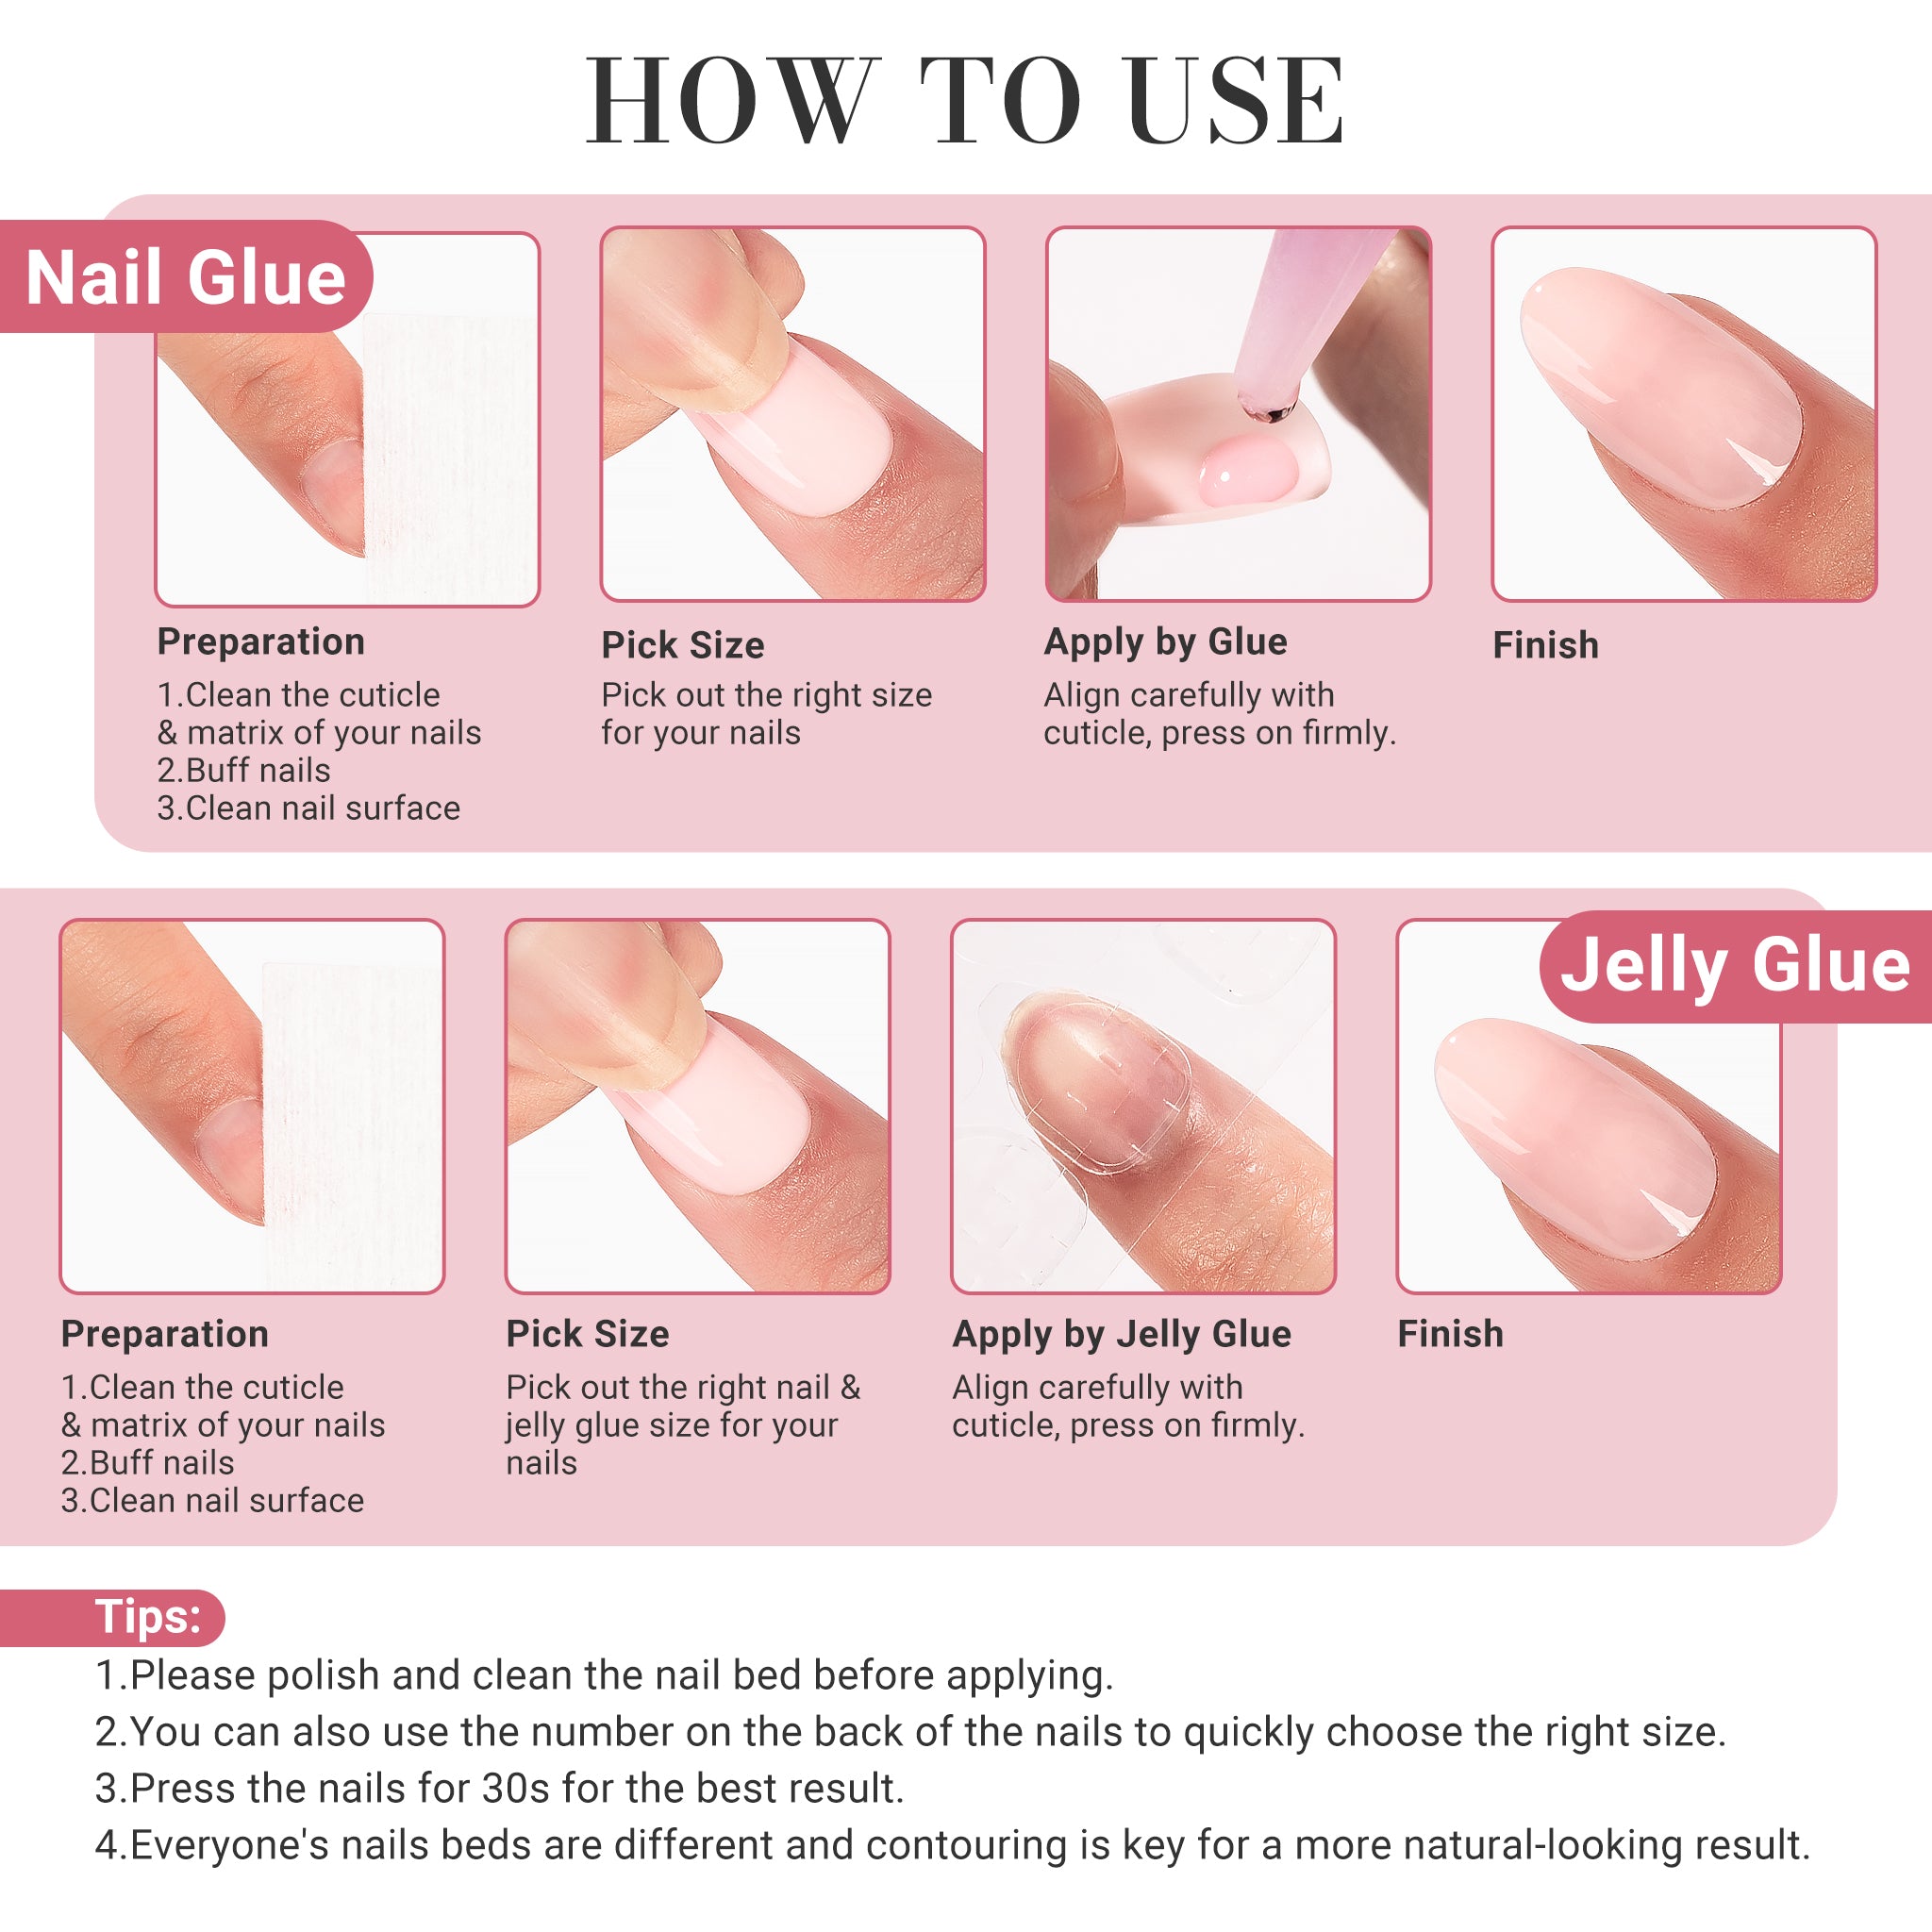 How To Use Press-On Nails  | MelodySusie